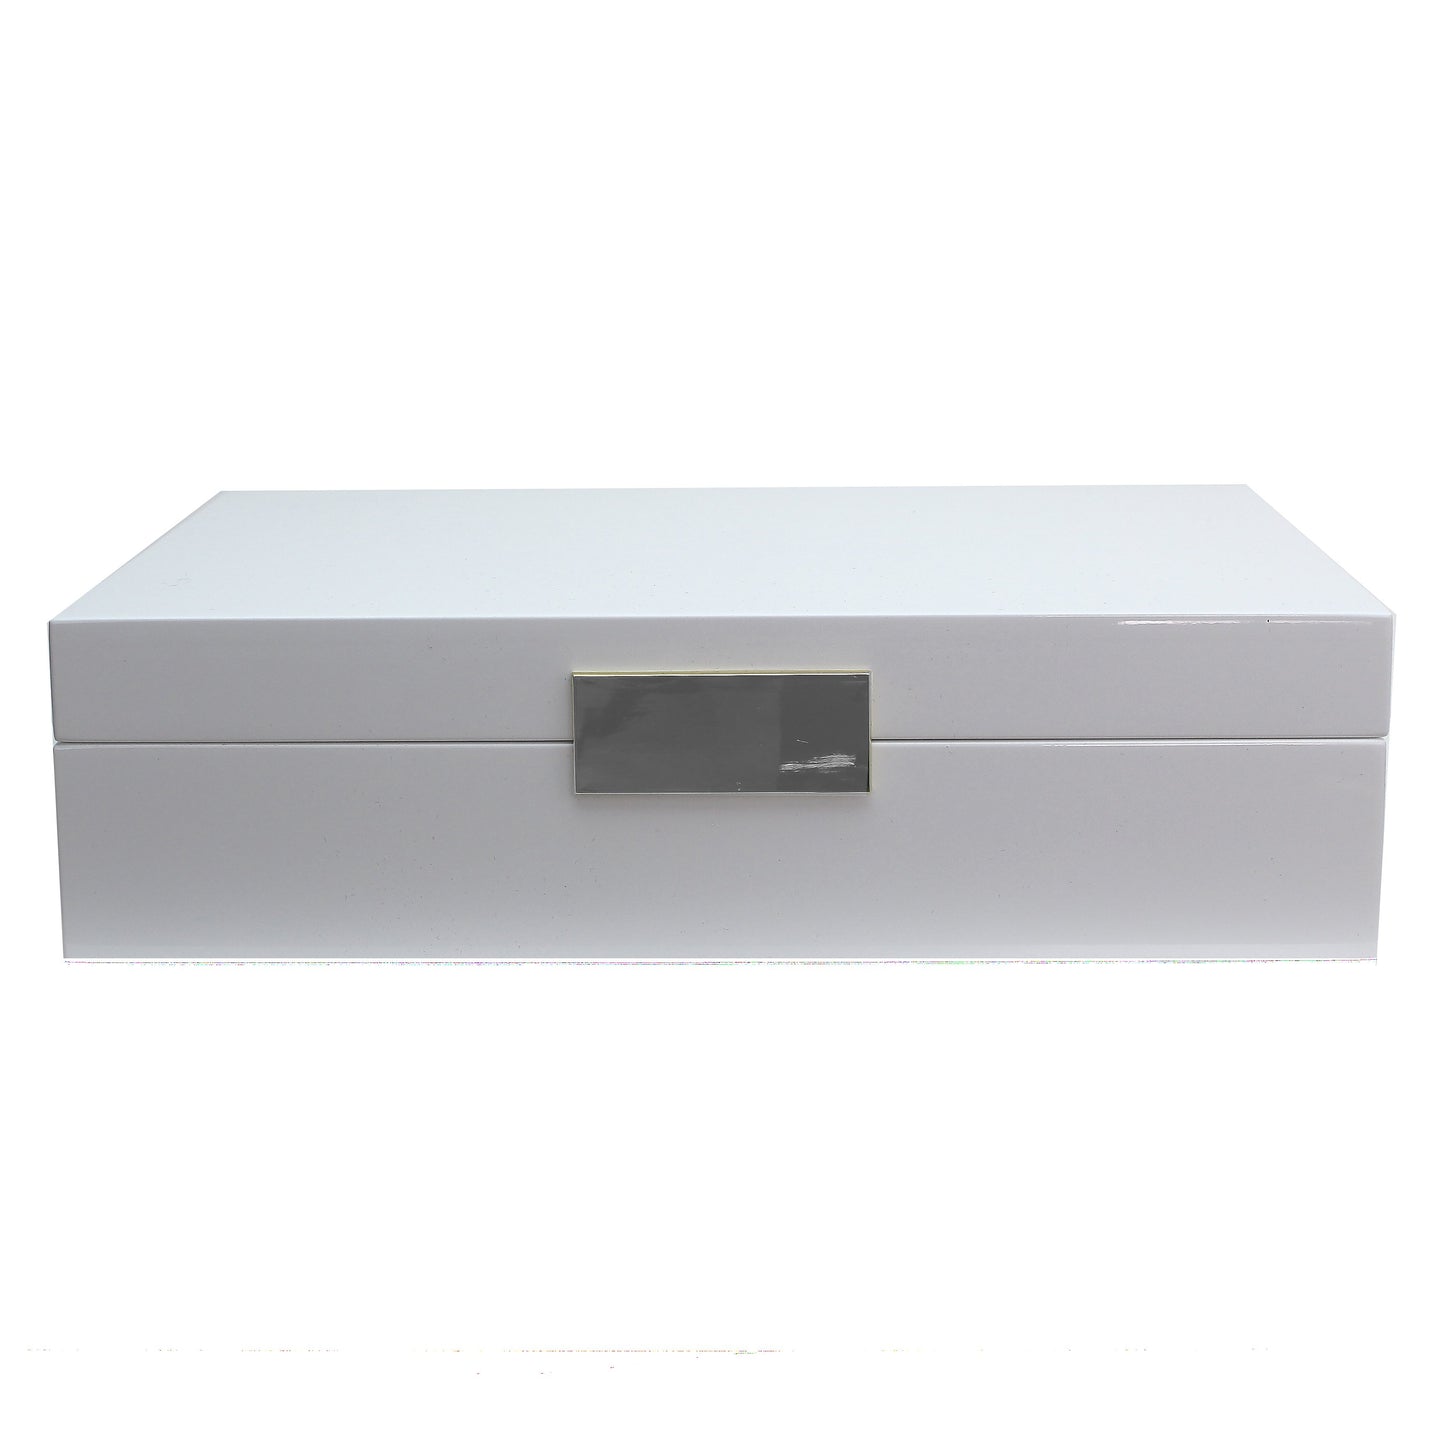 Large White Jewellery Box with Gold